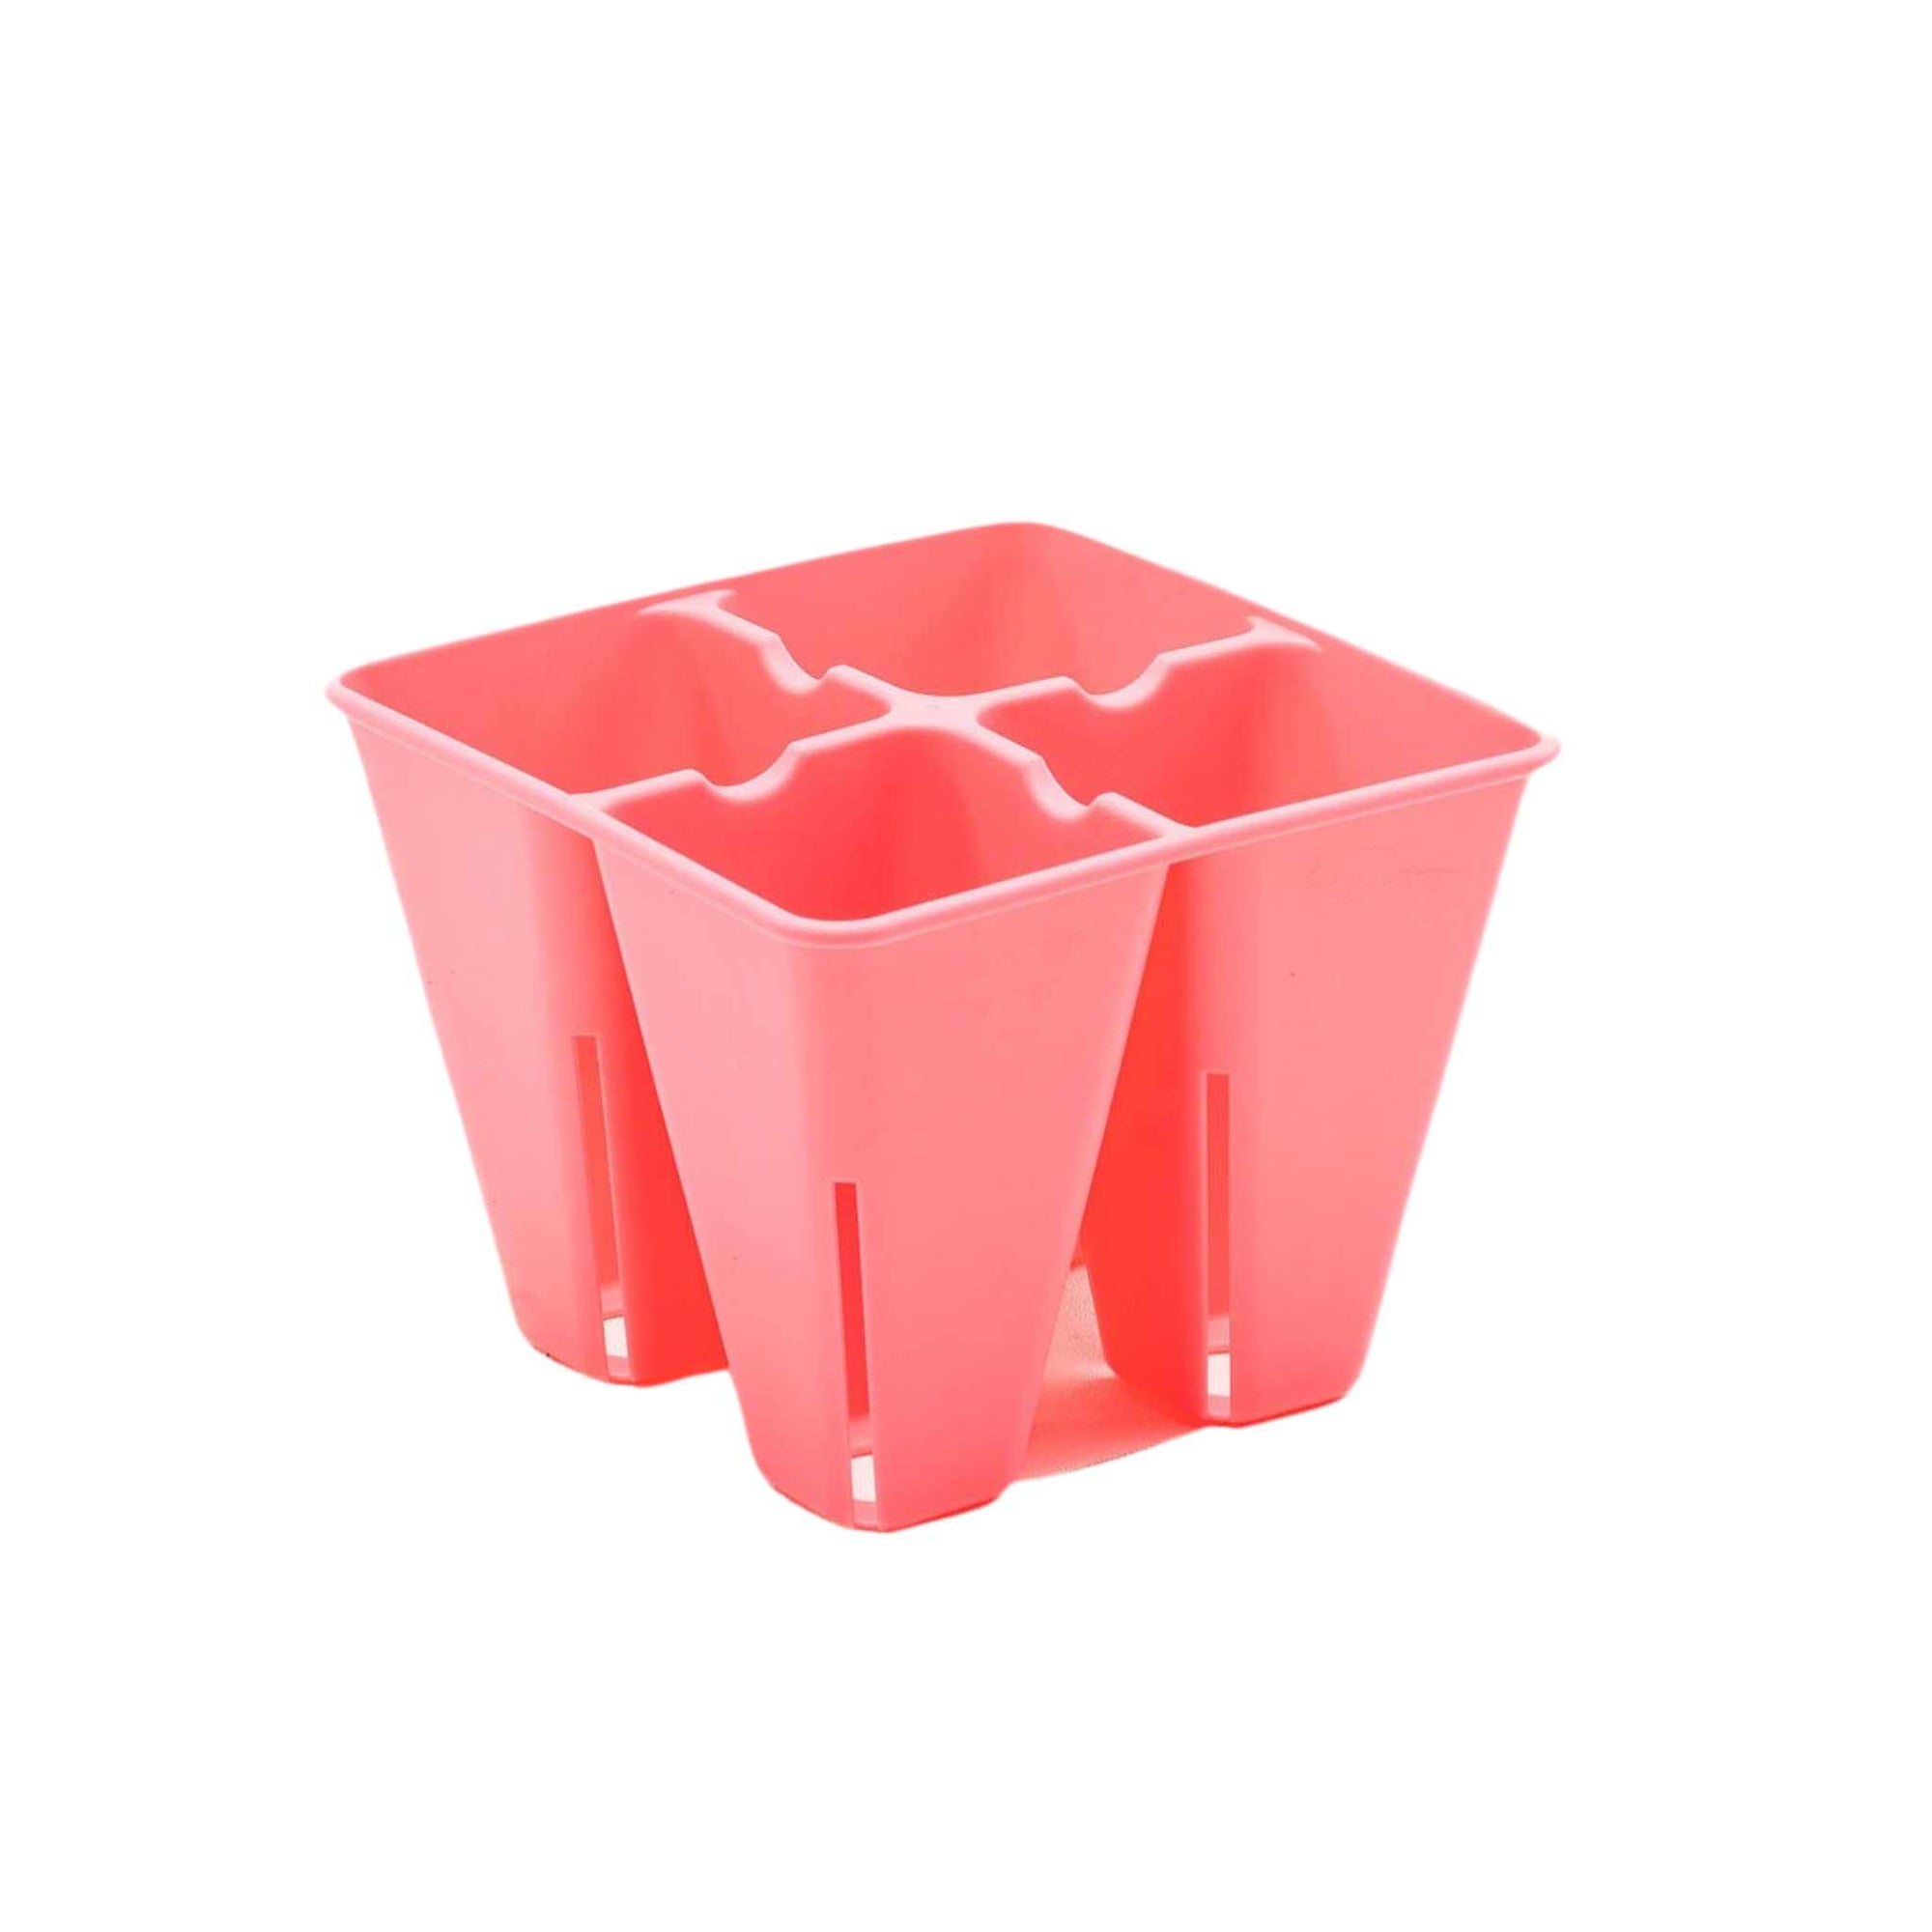 4 cell pink plug tray